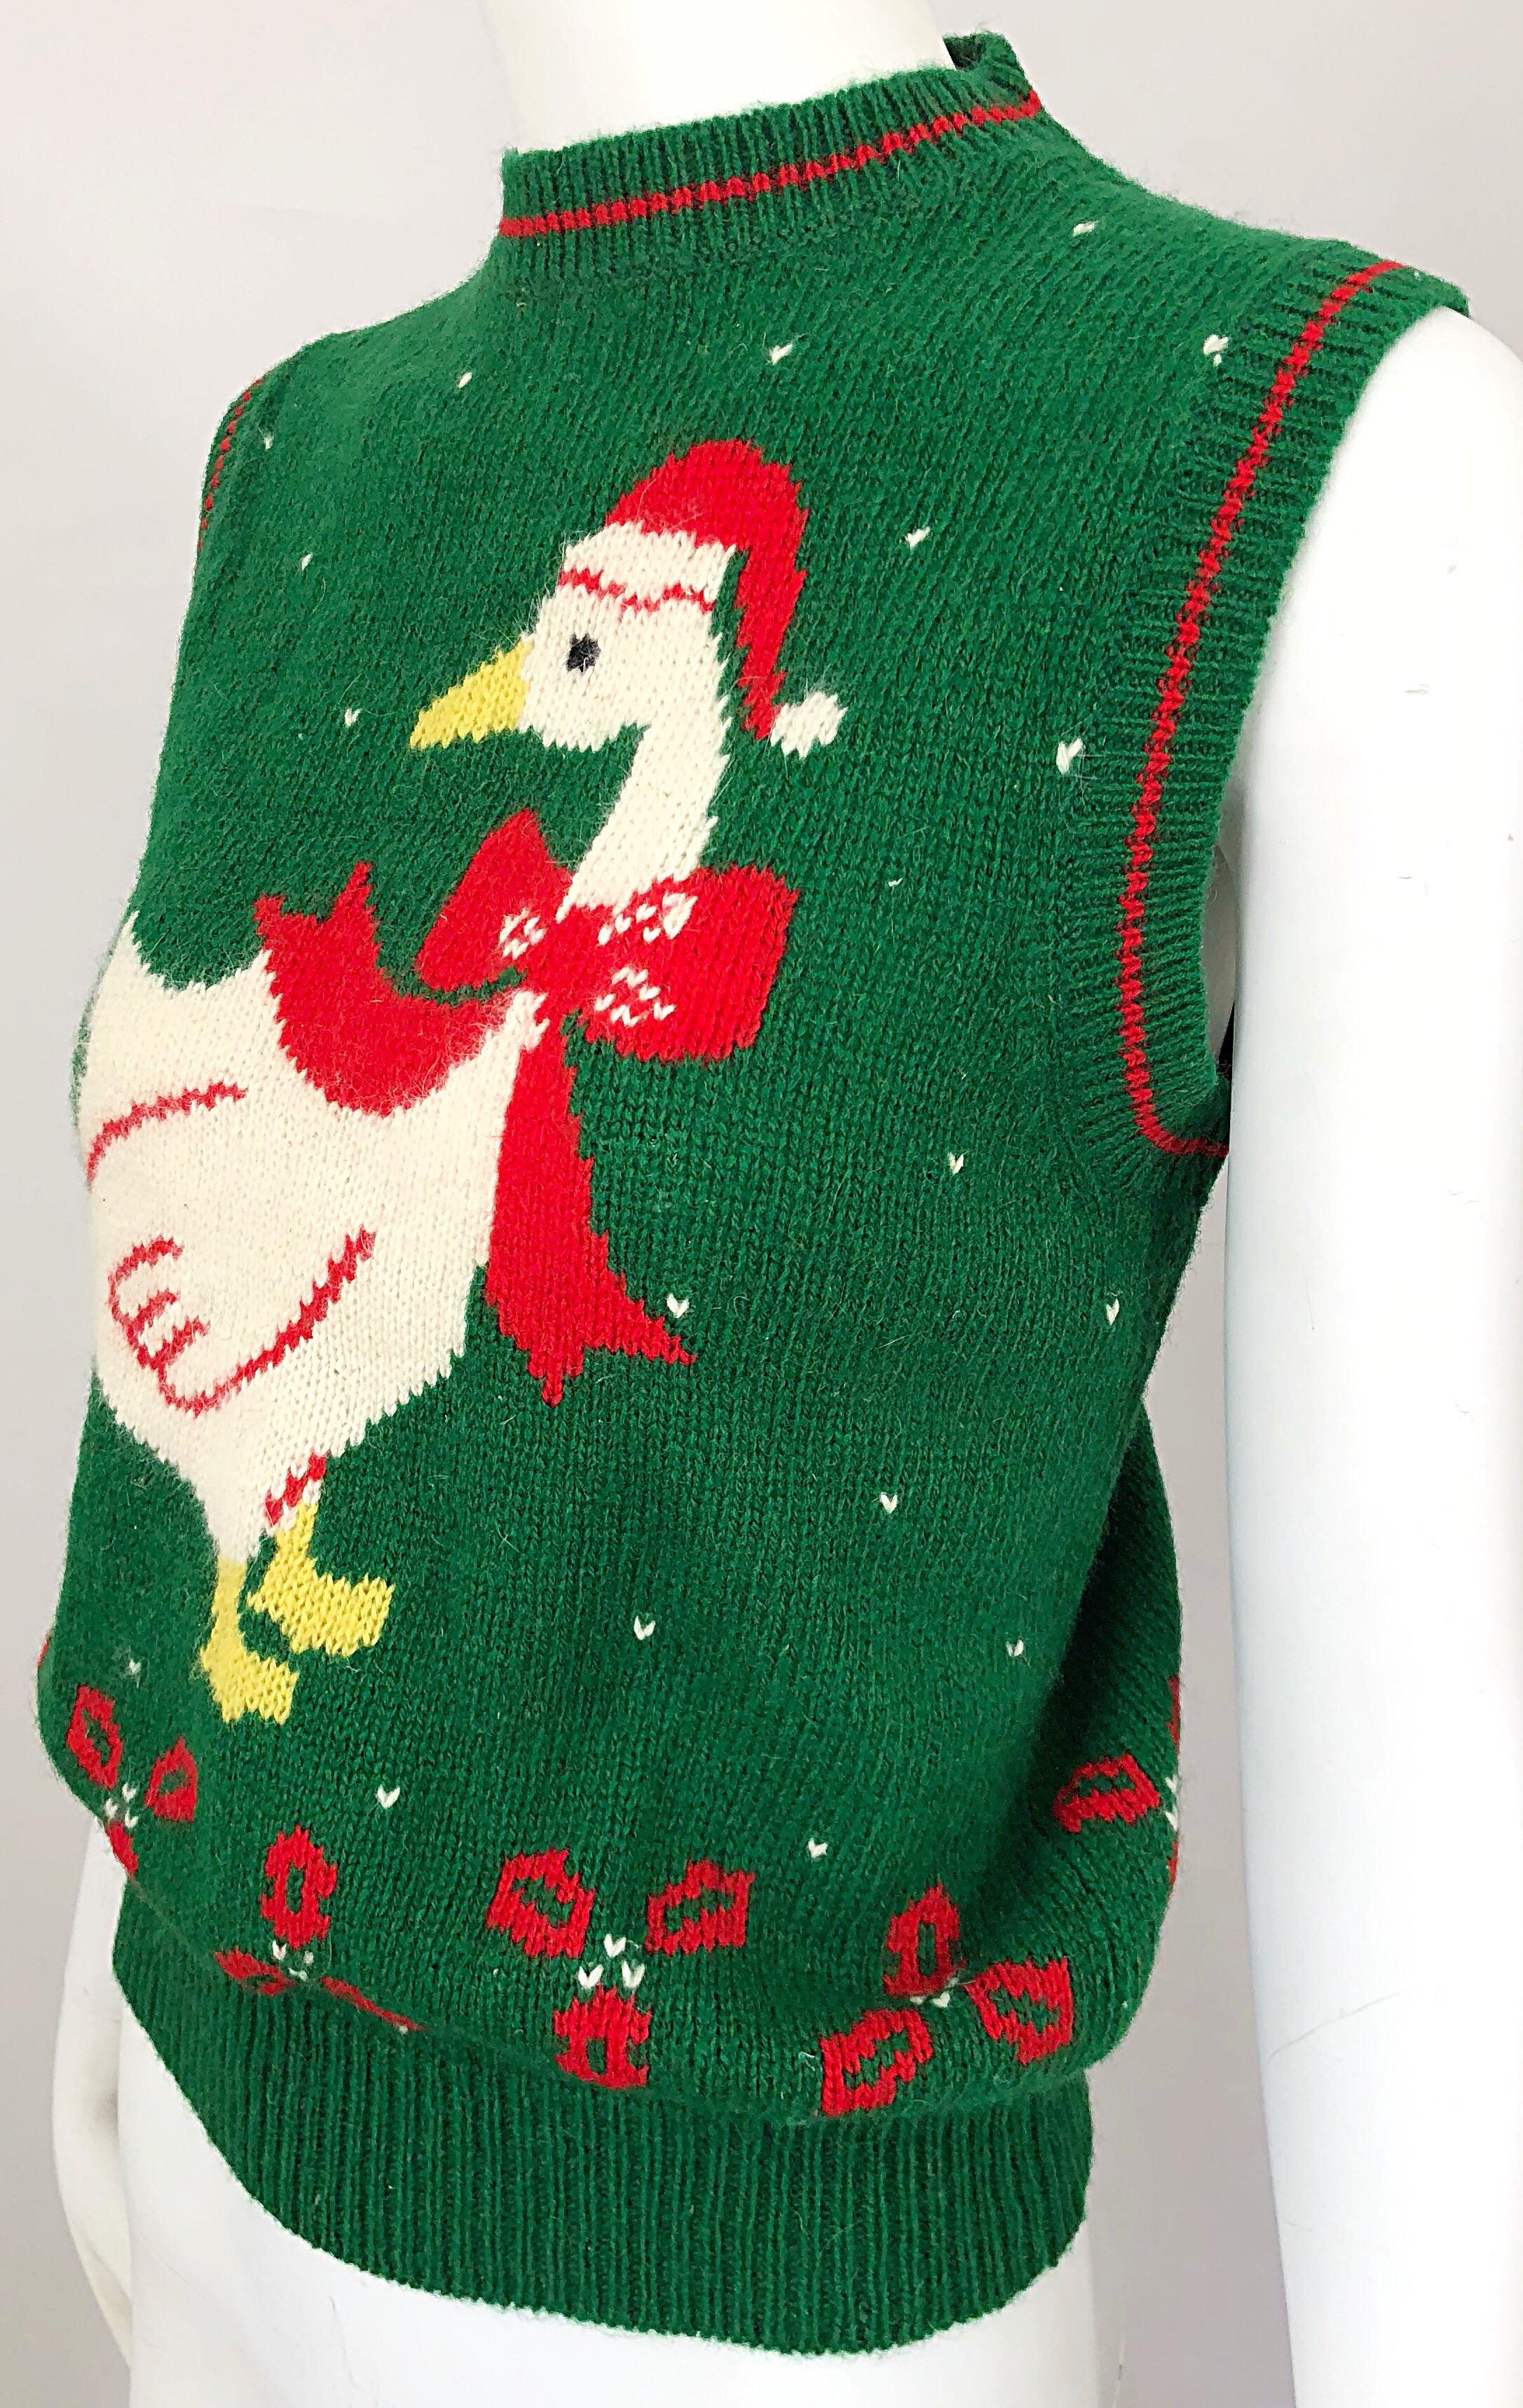 Women's or Men's 1970s Green and Red Intarsia Wool Swan Novelty 70s Christmas Sweater Vest